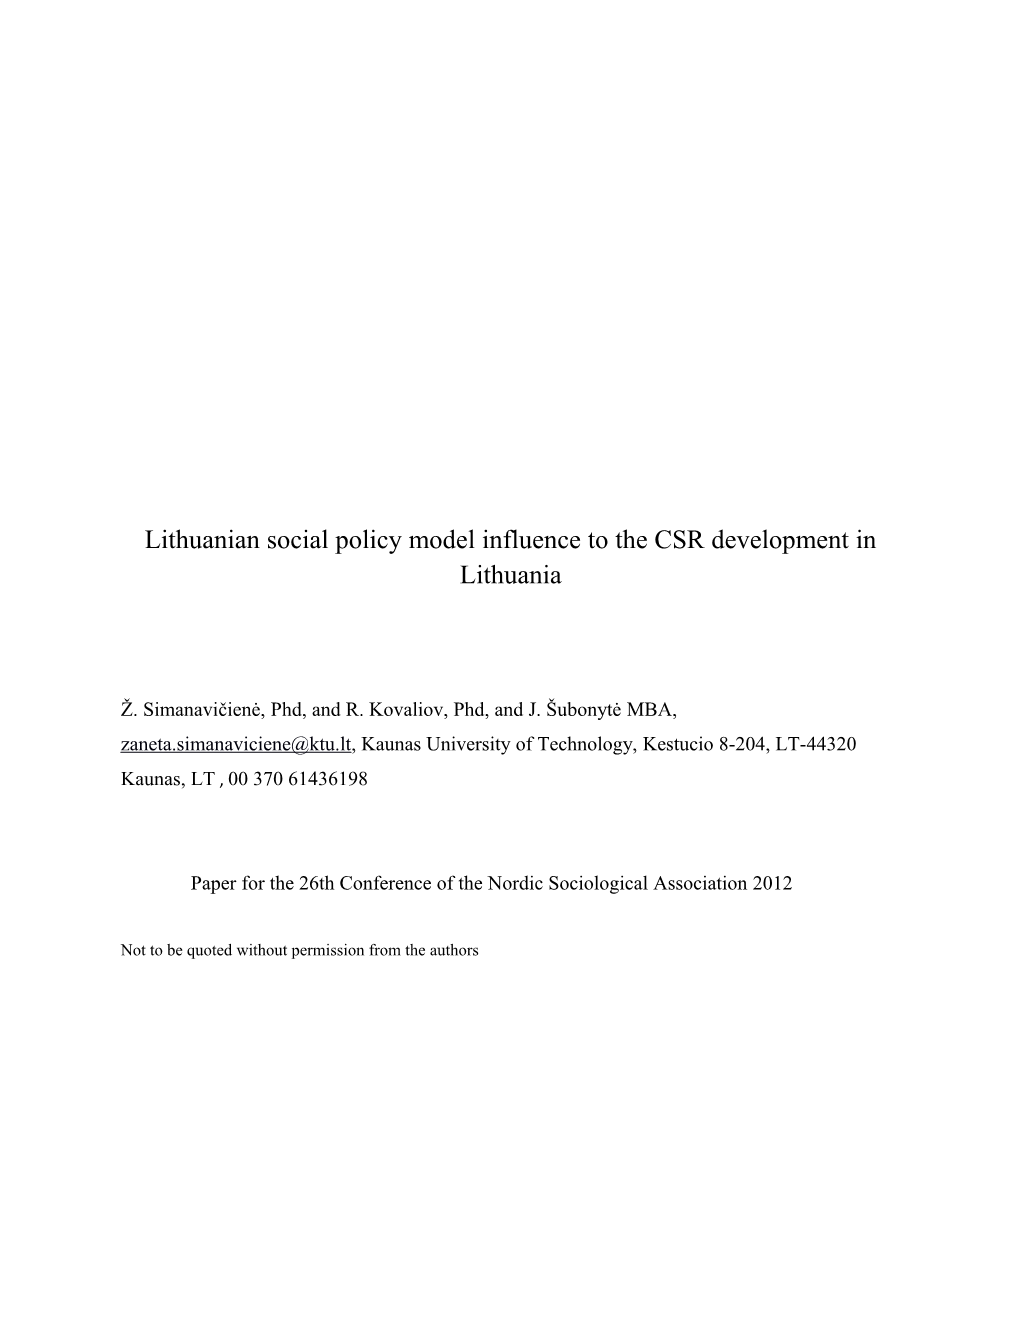 Lithuanian Social Policy Model Influence to the CSR Development in Lithuania